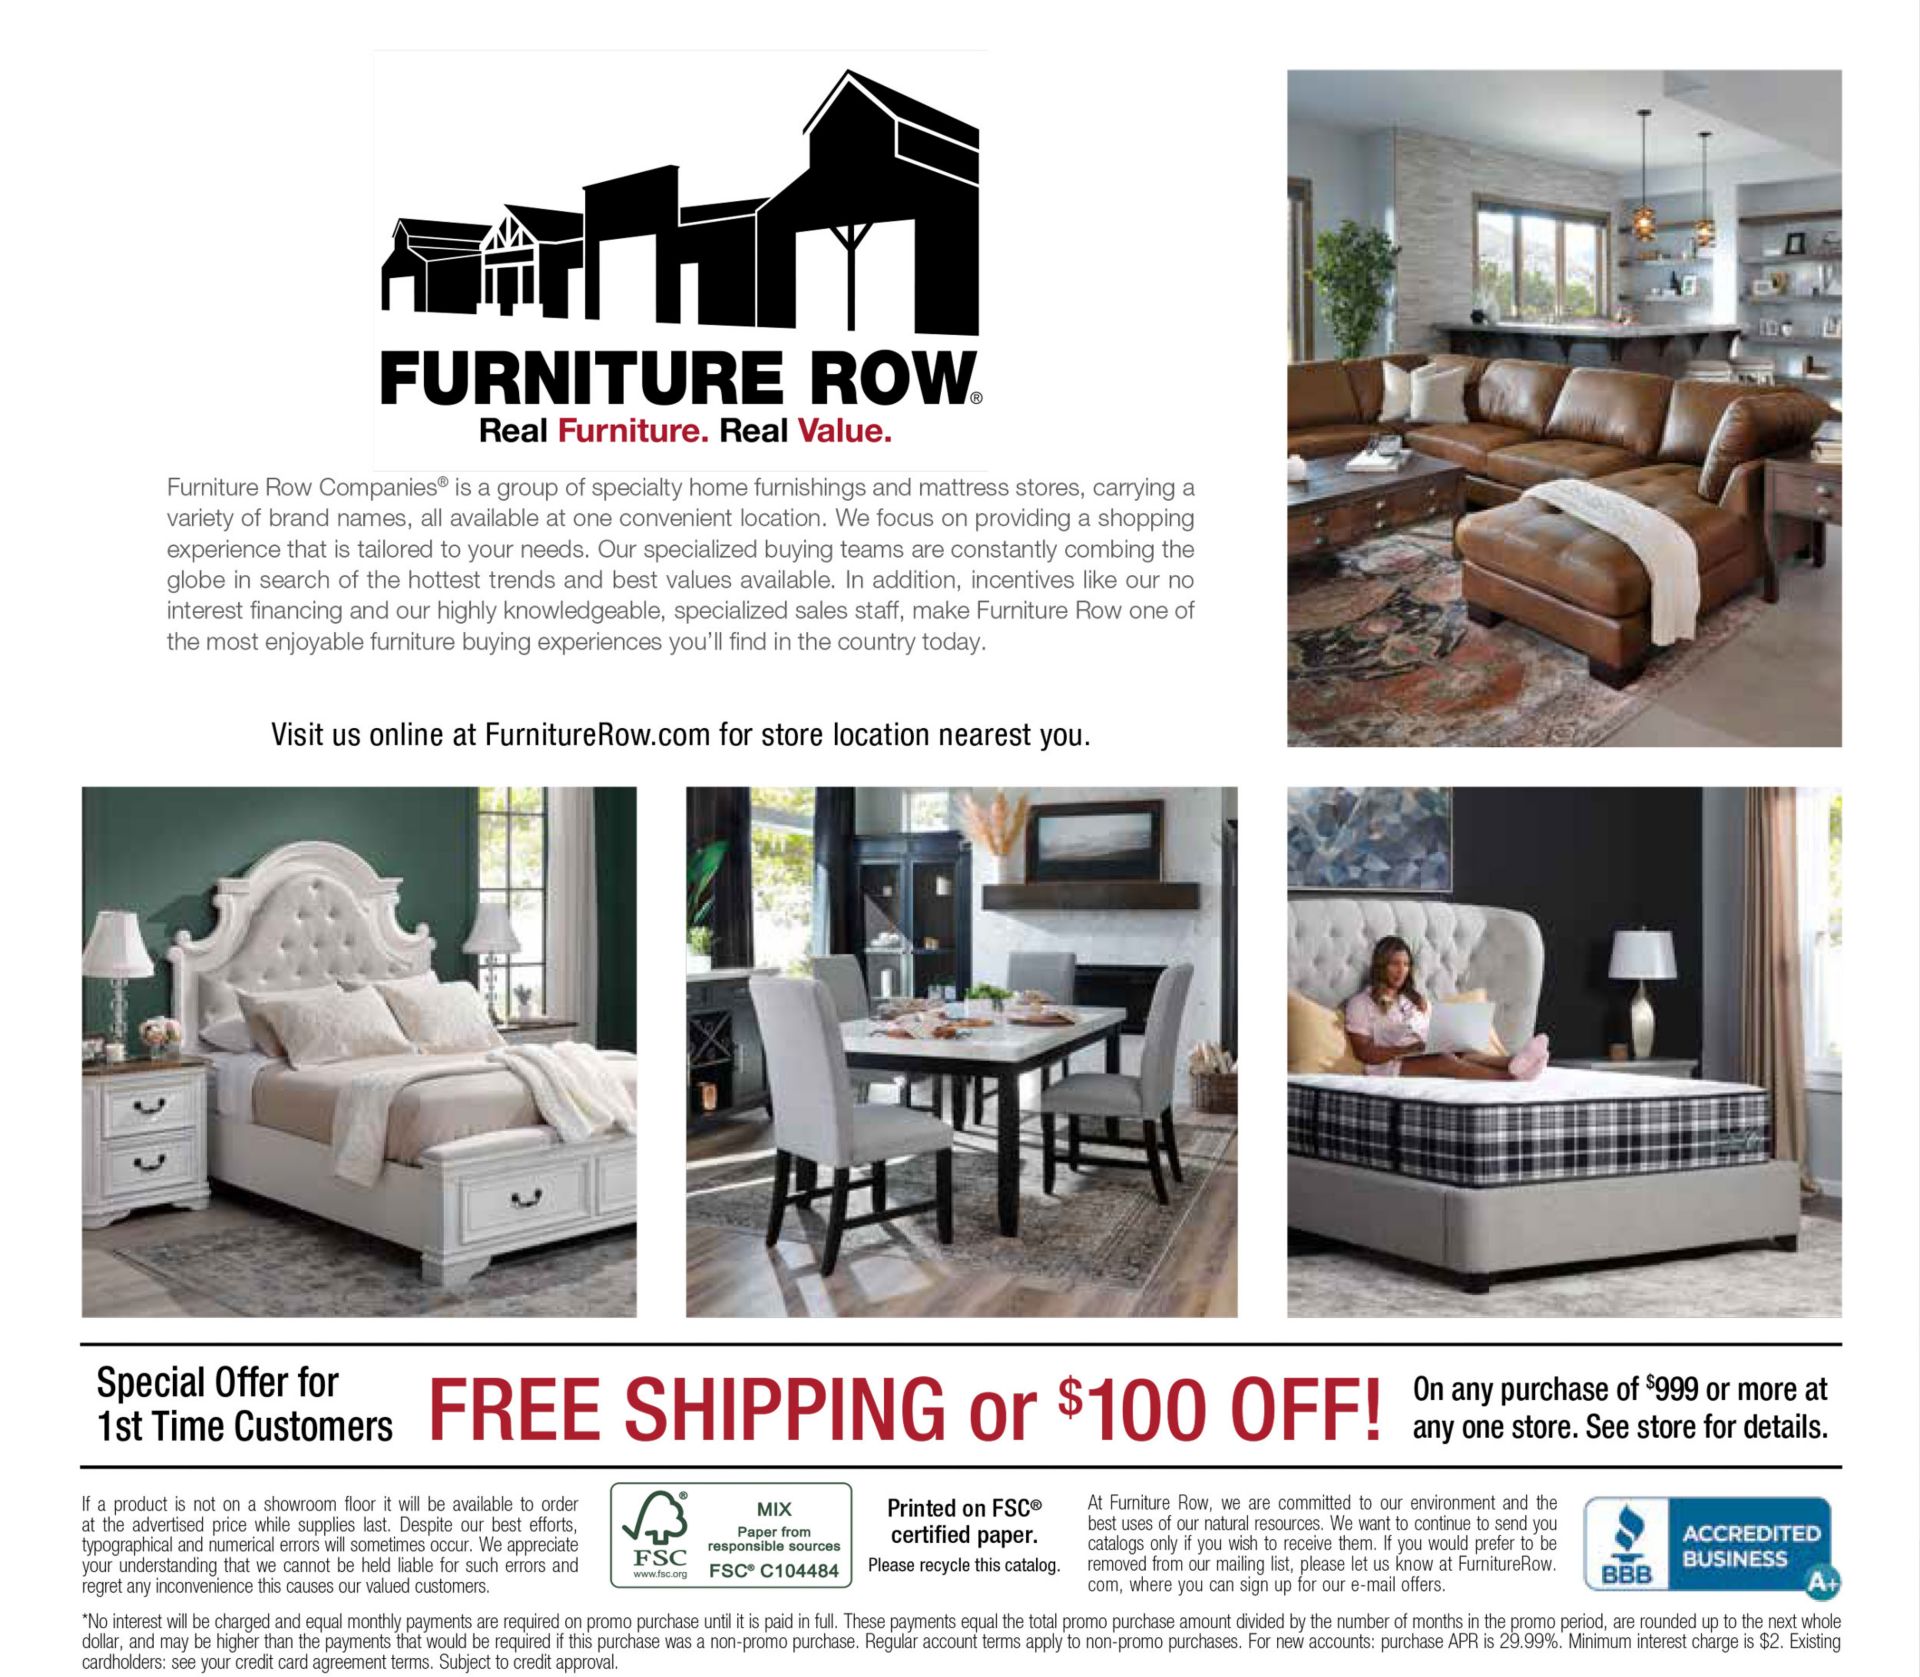 Back Page of Annual Catalog. Text: Furniture Row. Real Furniture Real Value. Furniture Row Furniture Row Companies® is a group of specialty home furnishings and mattress stores, carrying a variety of brand names, all available at one convenient location. We focus on providing a shopping experience that is tailored to your needs. Our specialized buying teams are constantly combing the globe in search of the hottest trends and best values available. In addition, incentives like our no interest financing and our highly knowledgeable, specialized sales staff, make Furniture Row one of the most enjoyable furniture buying experiences you’ll find in the country today. Visit us online at FurnitureRow.com for store location nearest you. Special Offer for 1st Time Customers. FREE SHIPPING or $100 OFF!On any purchase of $999 or more at any one store. See store for details. If a product is not on a showroom floor it will be available to order at the advertised price while supplies last. Despite our best efforts, typographical and numerical errors will sometimes occur. We appreciate your understanding that we cannot be held liable for such errors and regret any inconvenience this causes our valued customers. At Furniture Row, we are committed to our environment and the best uses of our natural resources. We want to continue to send you catalogs only if you wish to receive them. If you would prefer to be removed from our mailing list, please let us know at FurnitureRow. com, where you can sign up for our e-mail offers.